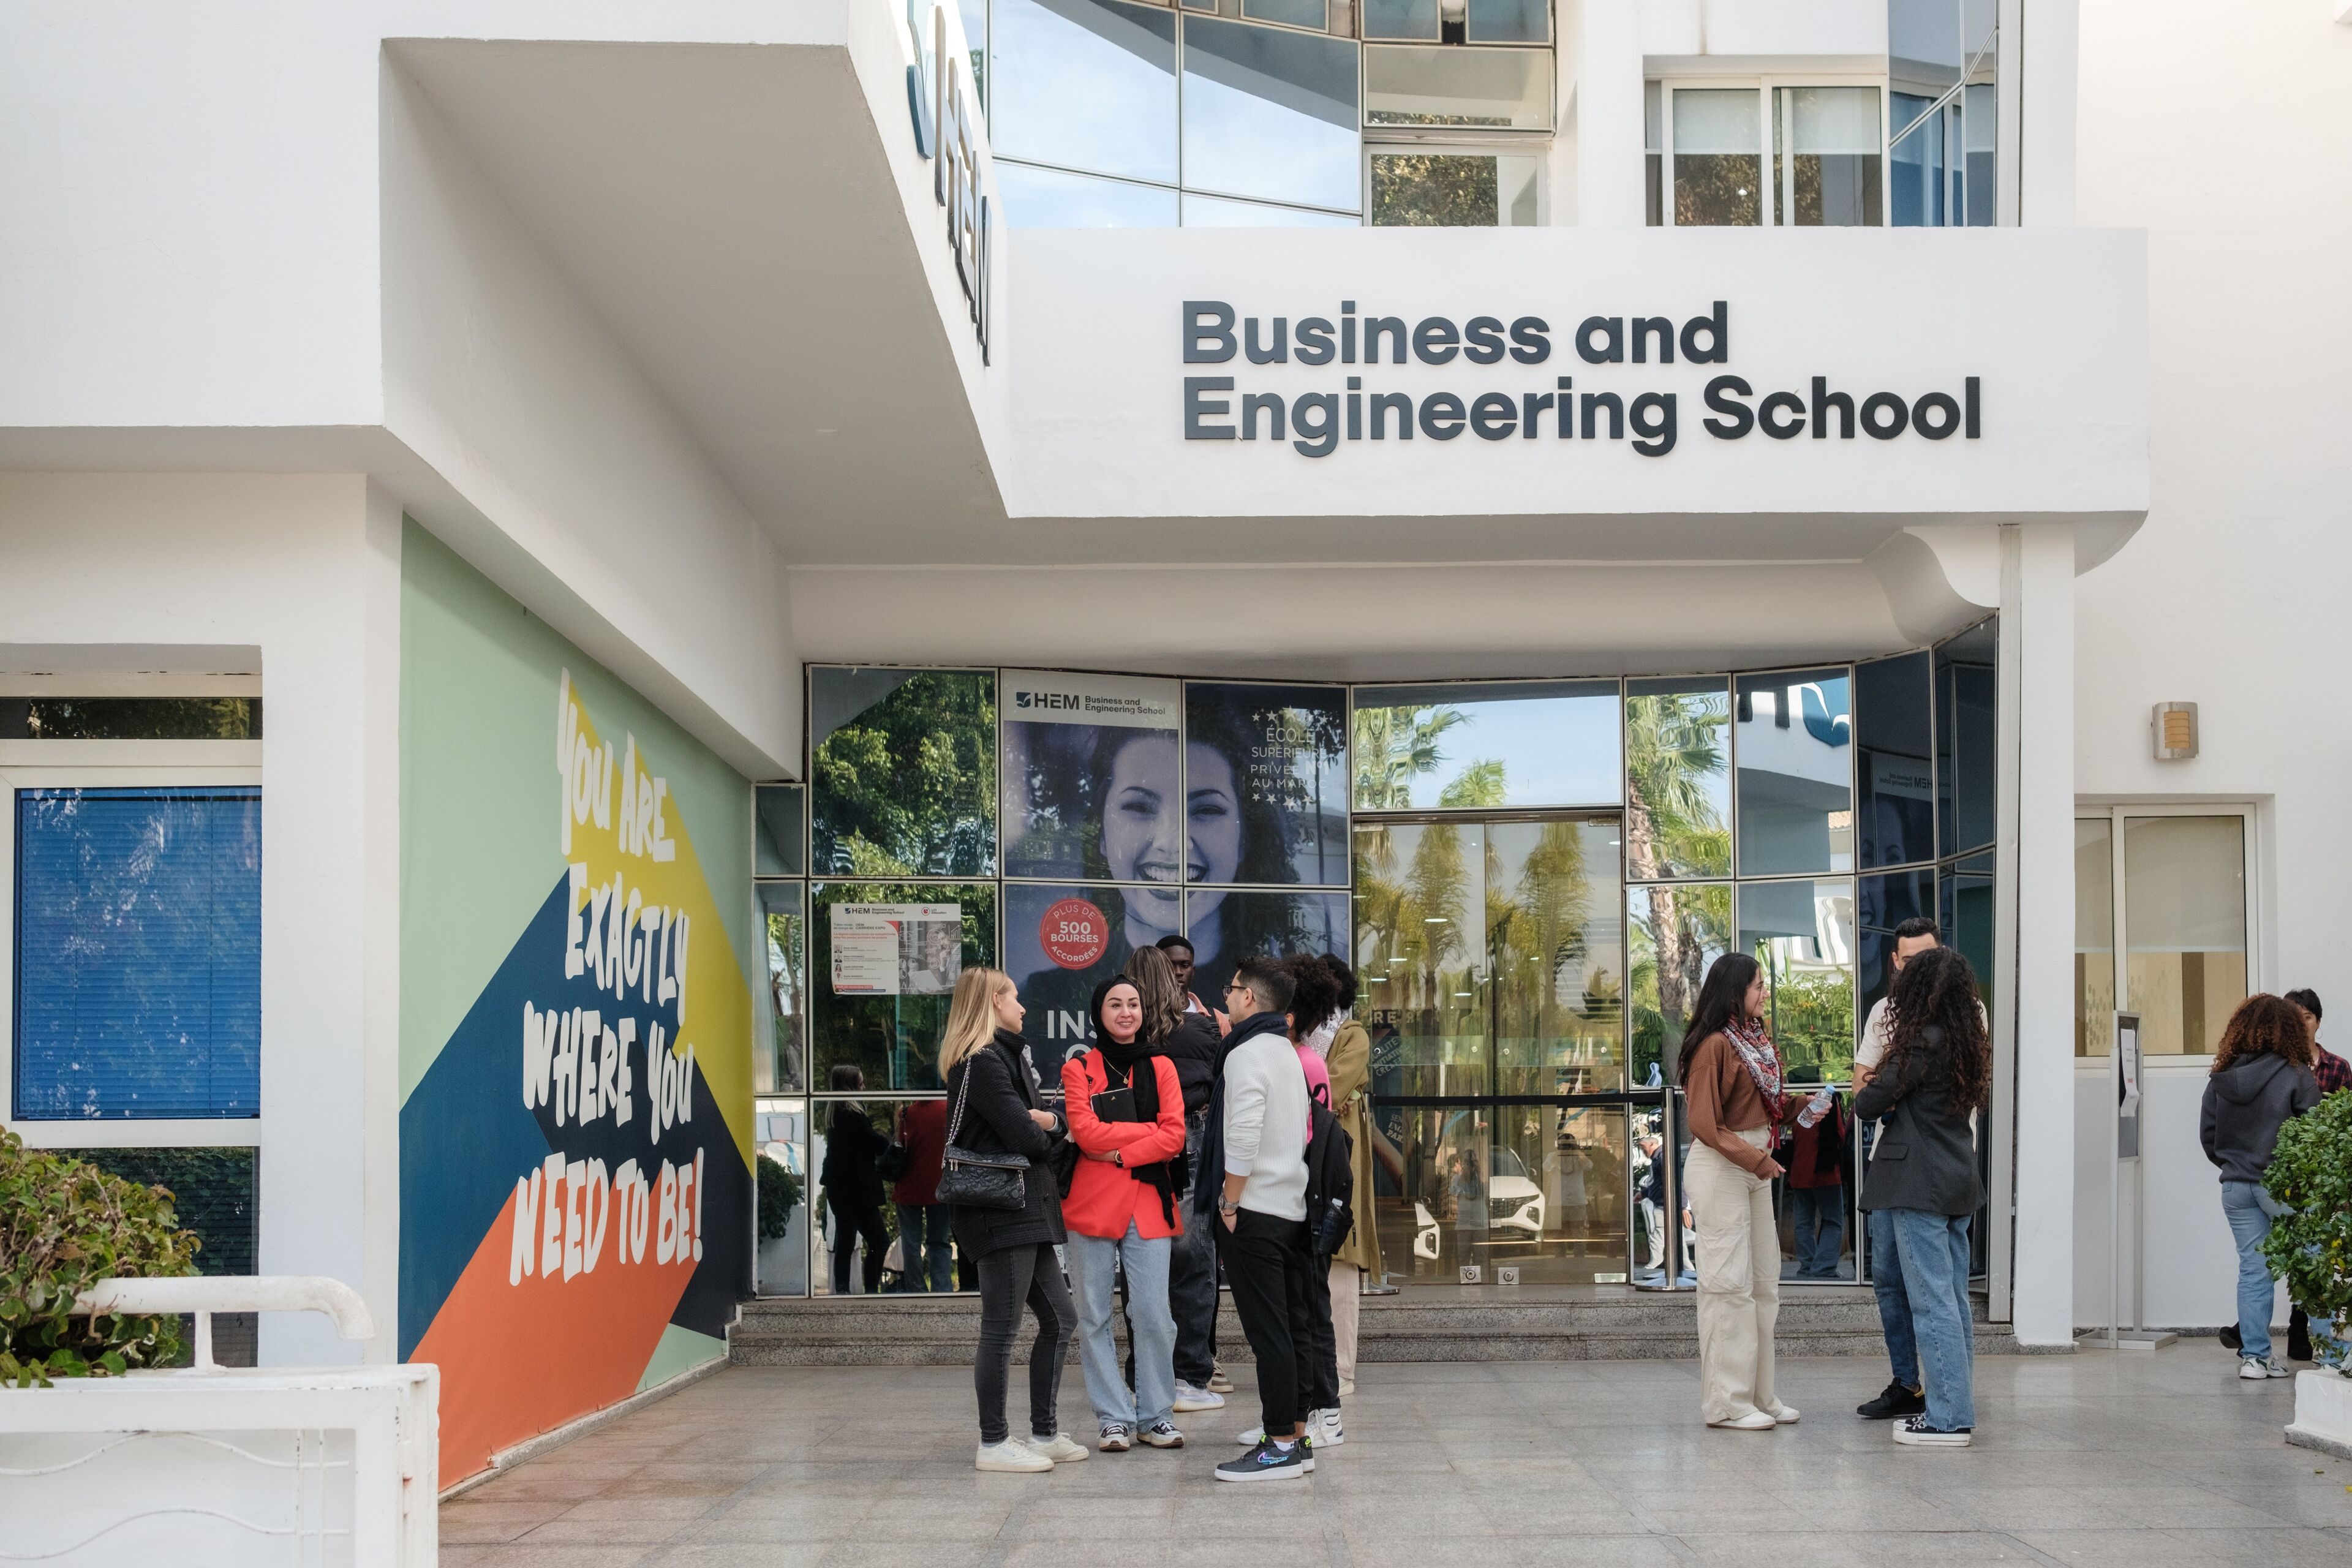 Students gather at the entrance of the Business and Engineering School, surrounded by modern architecture and a motivational banner.